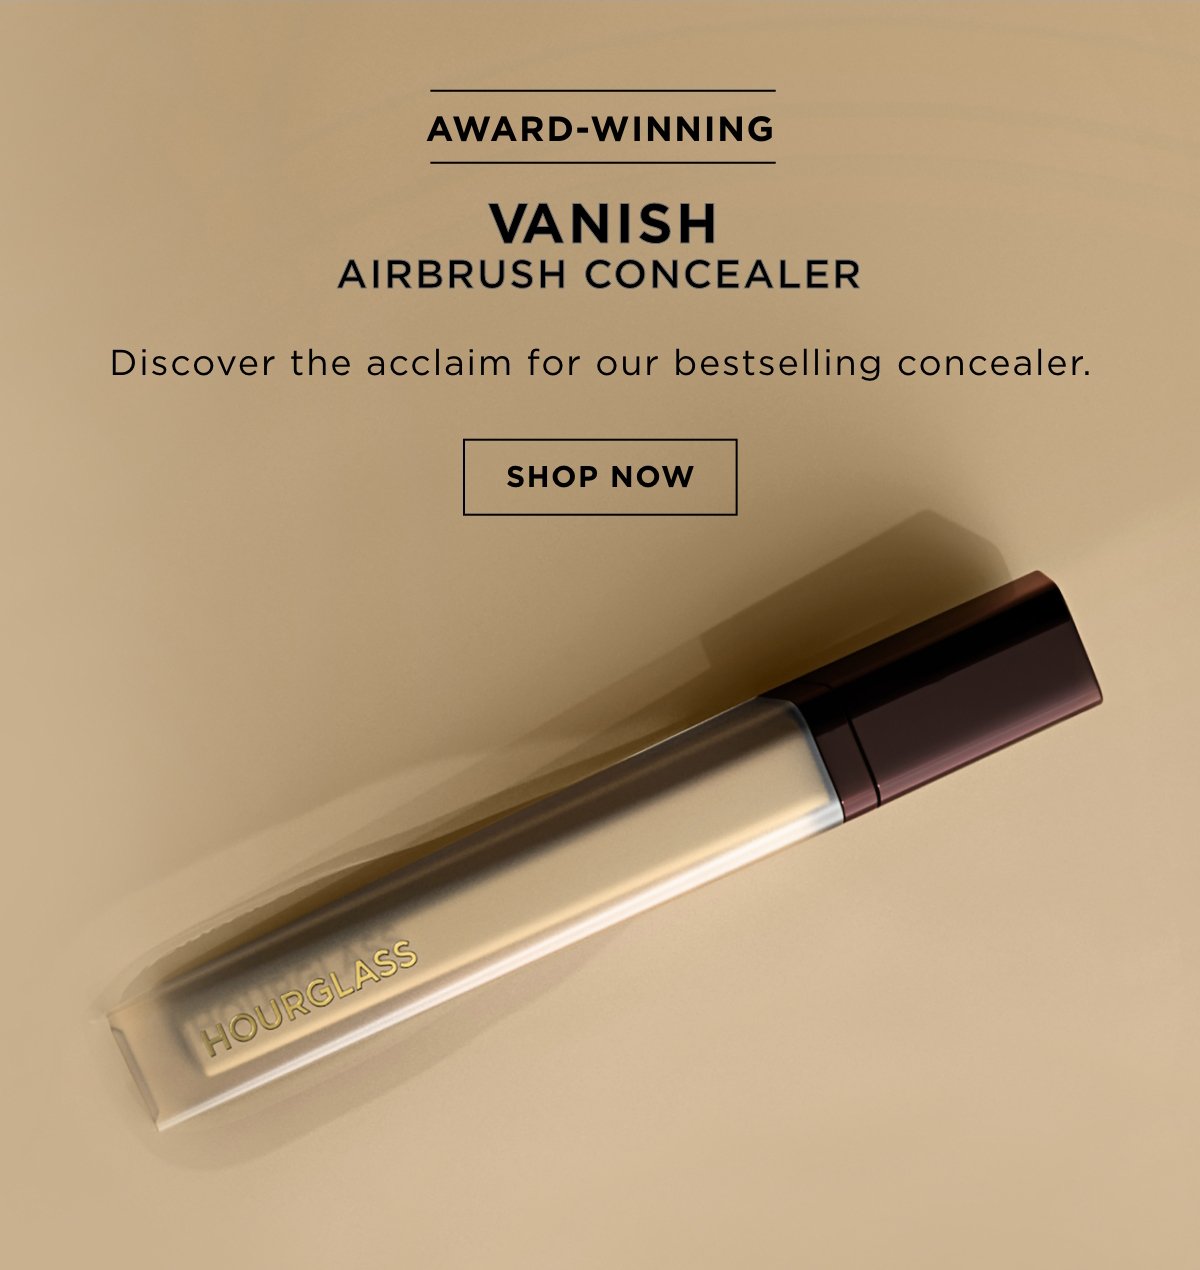 Vanish Airbrush Concealer | Discover the acclaim for our bestselling concealer